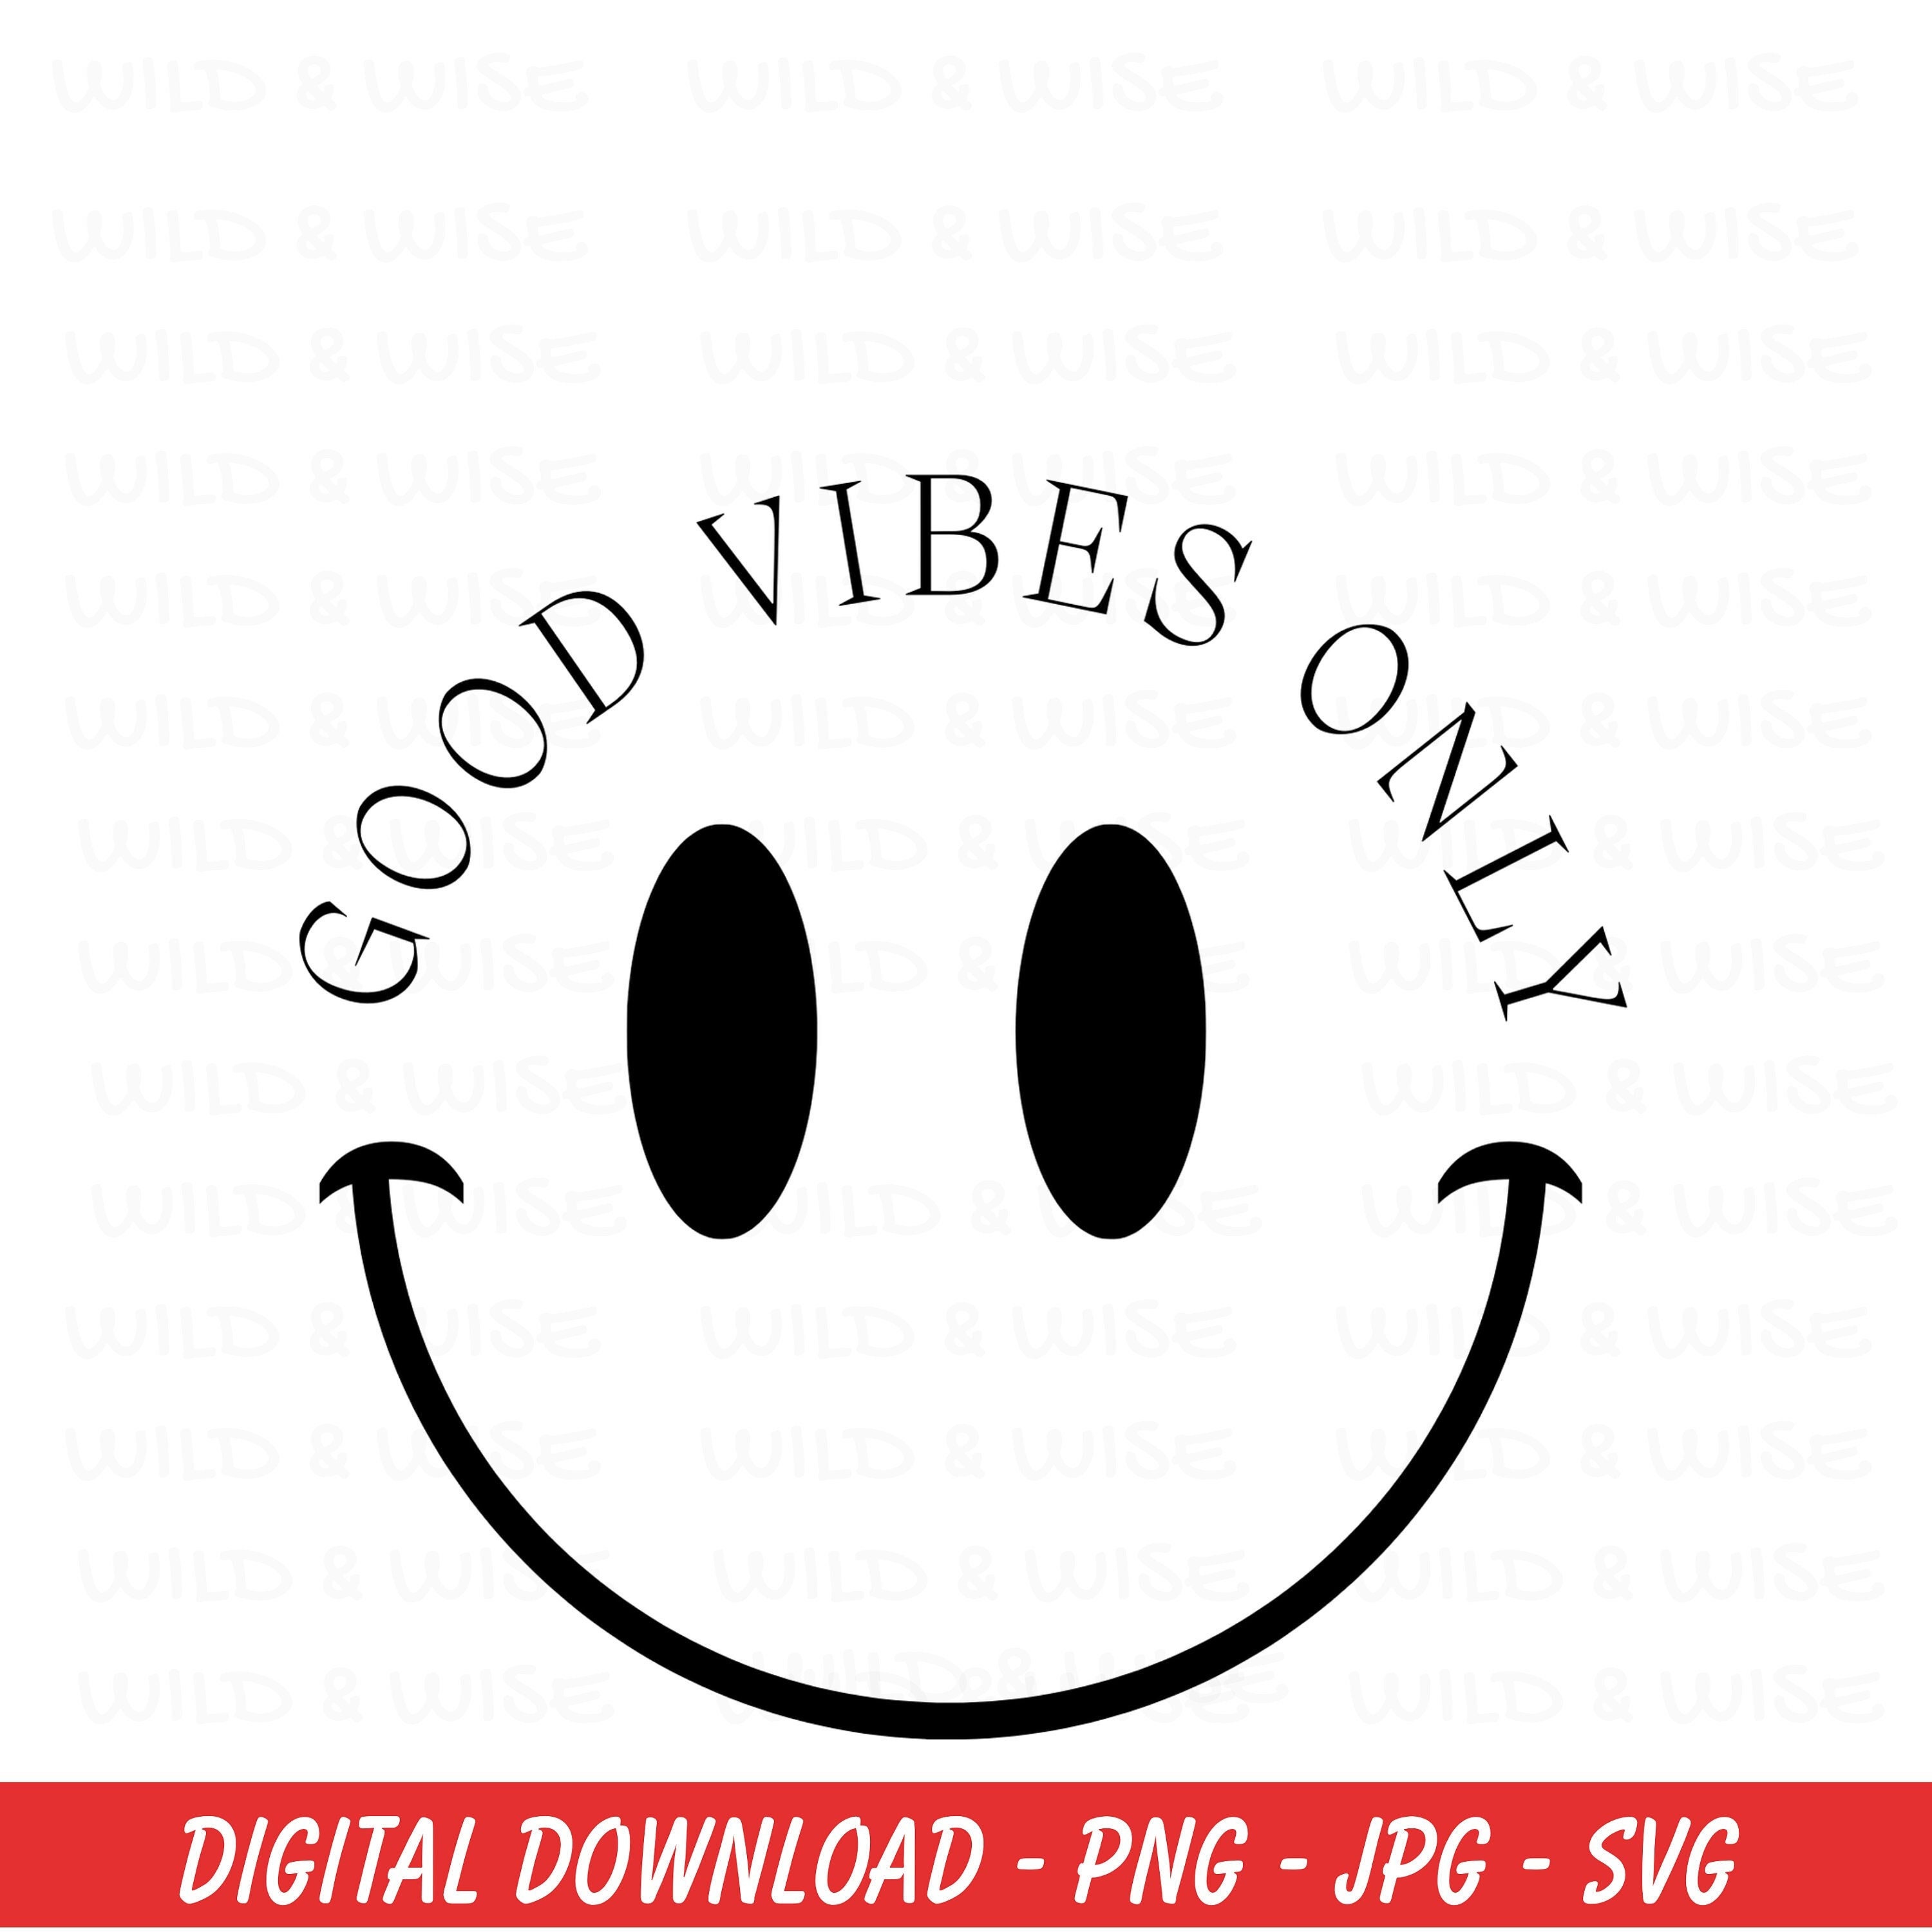 Positive Vibes Etsy